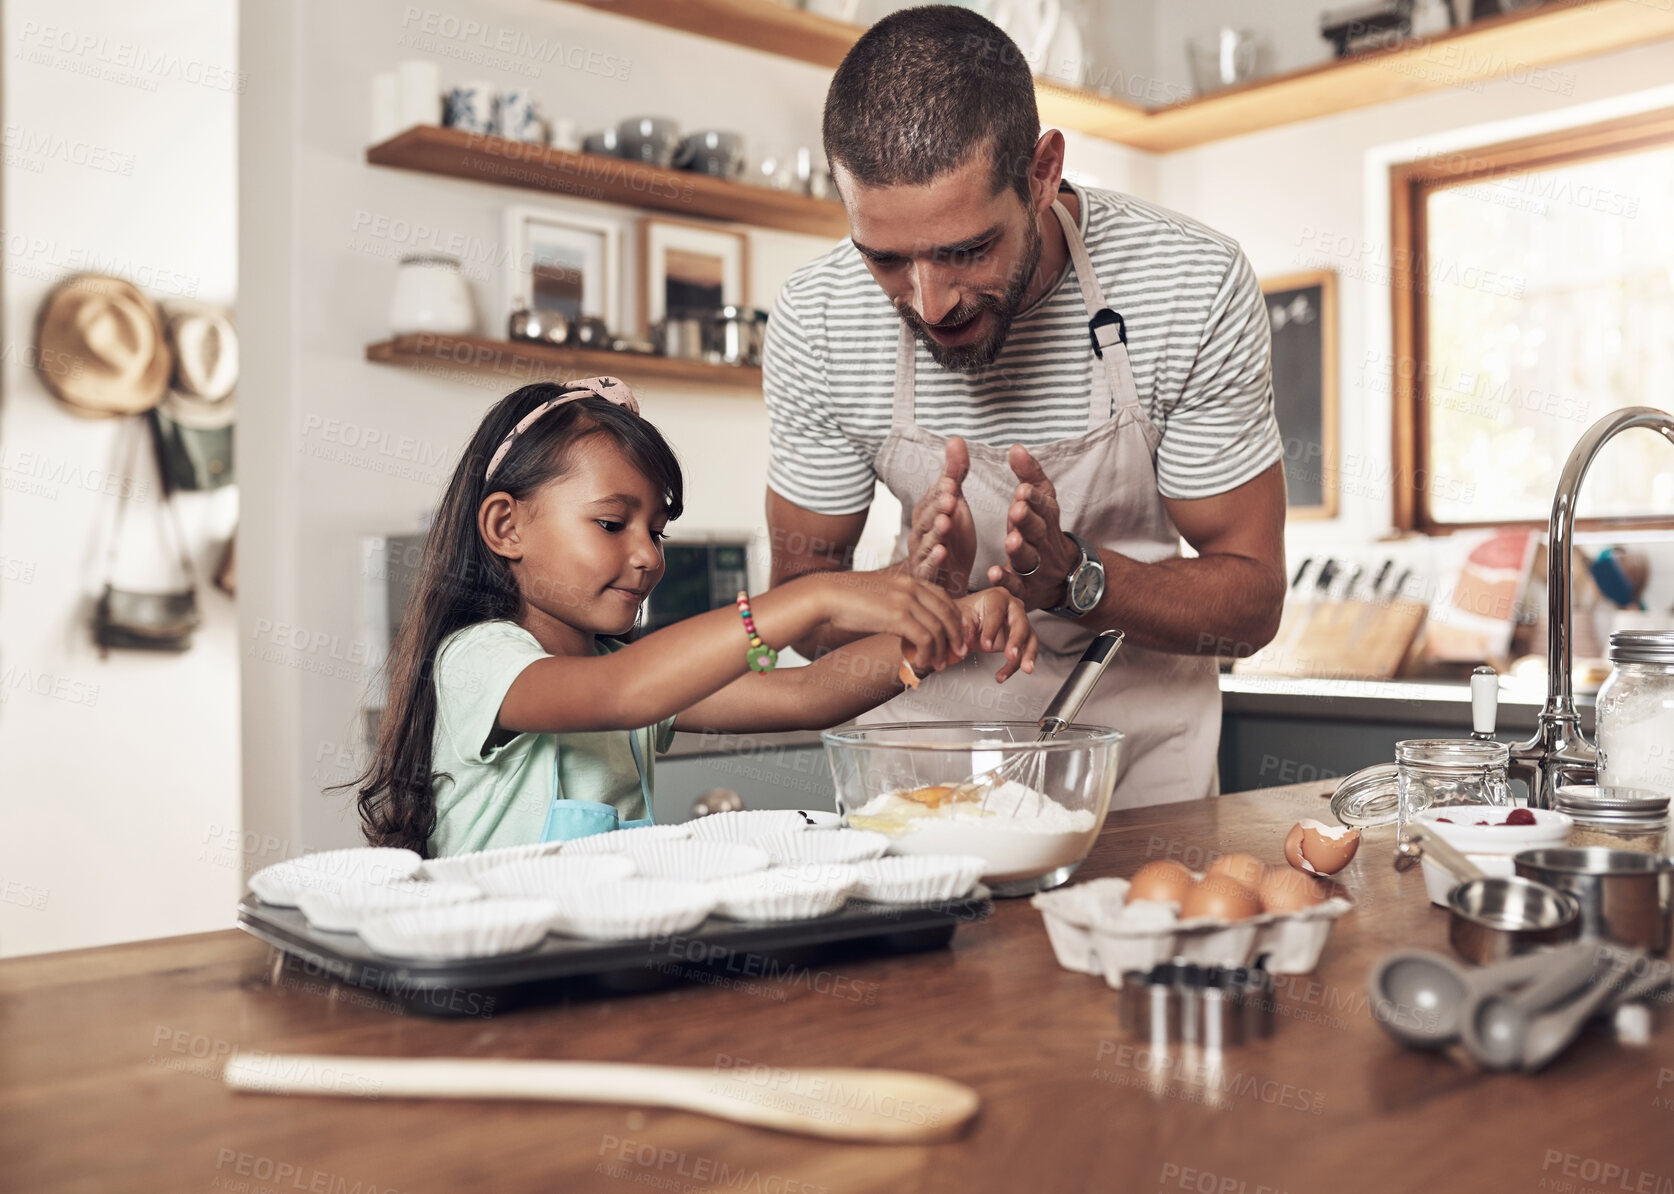 Buy stock photo Shot of a father teaching his daughter how to bake in the kitchen at home